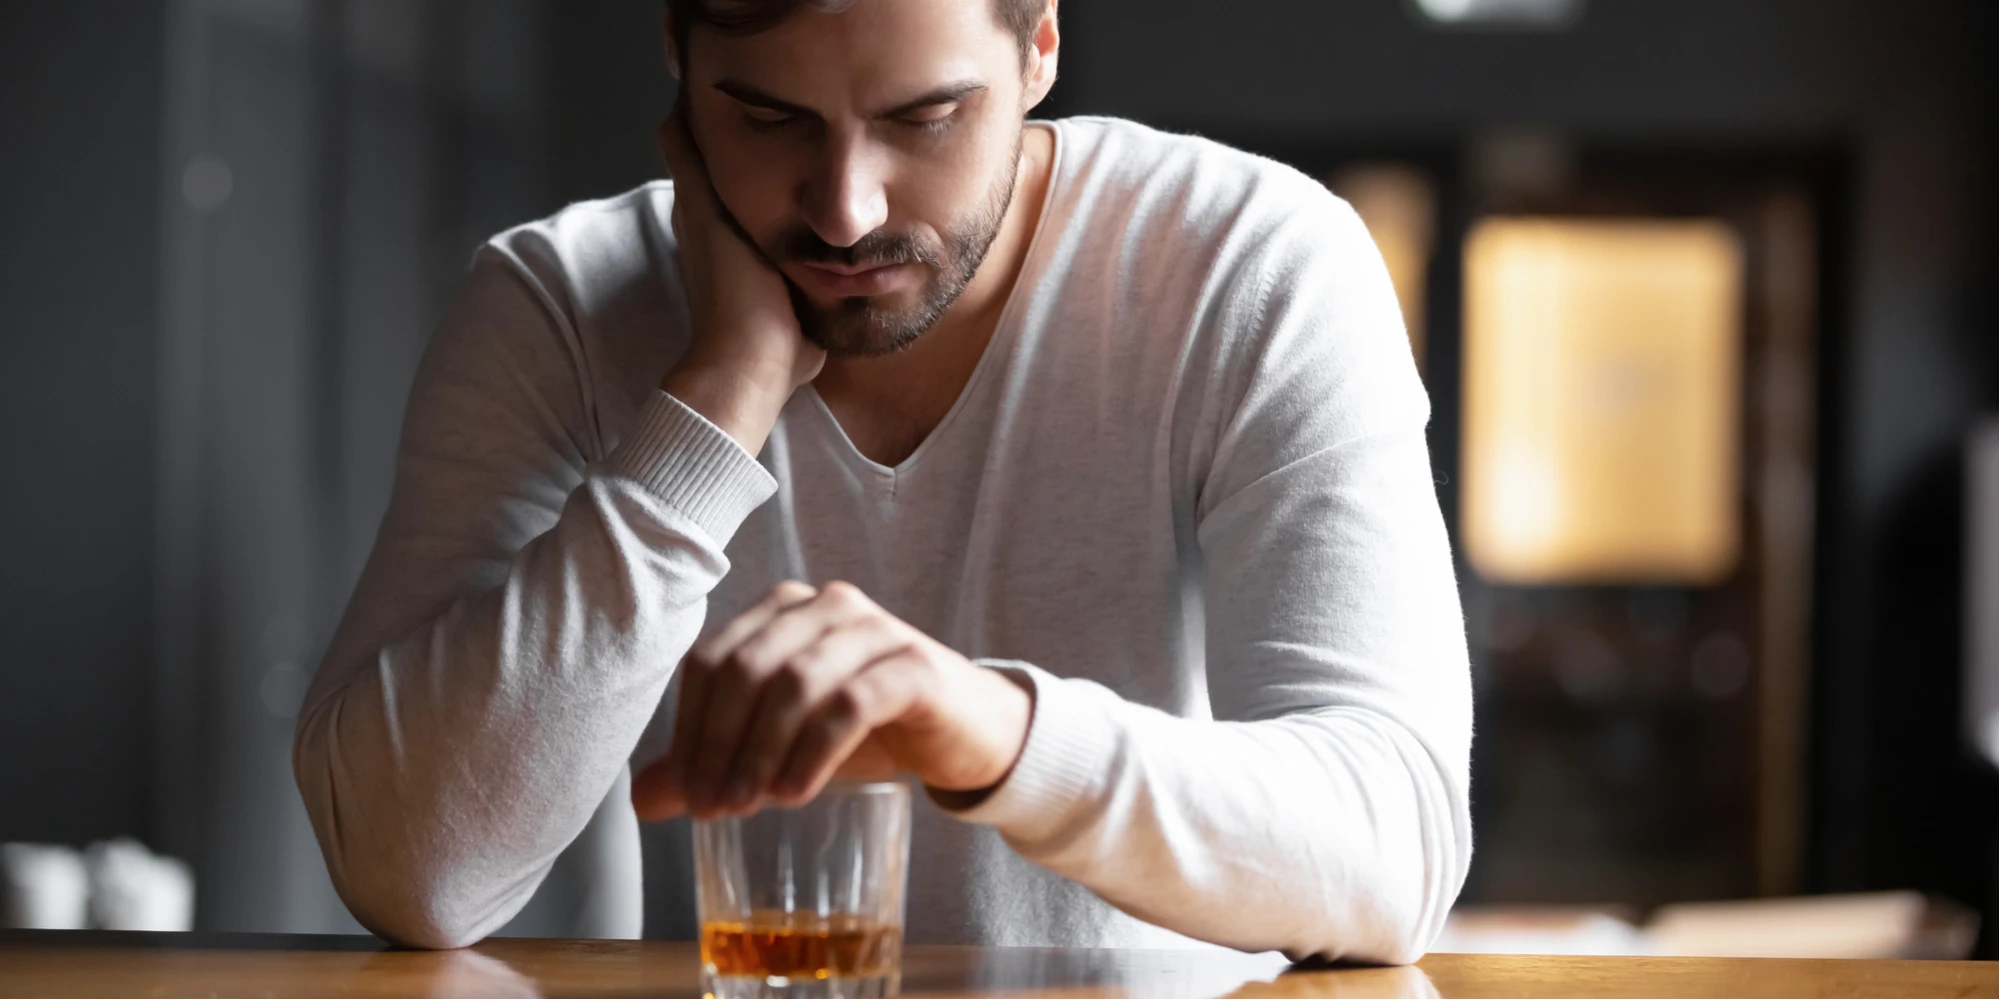 Alternatives to Drinking and Using: How to Stay Sober - Baton Rouge BH